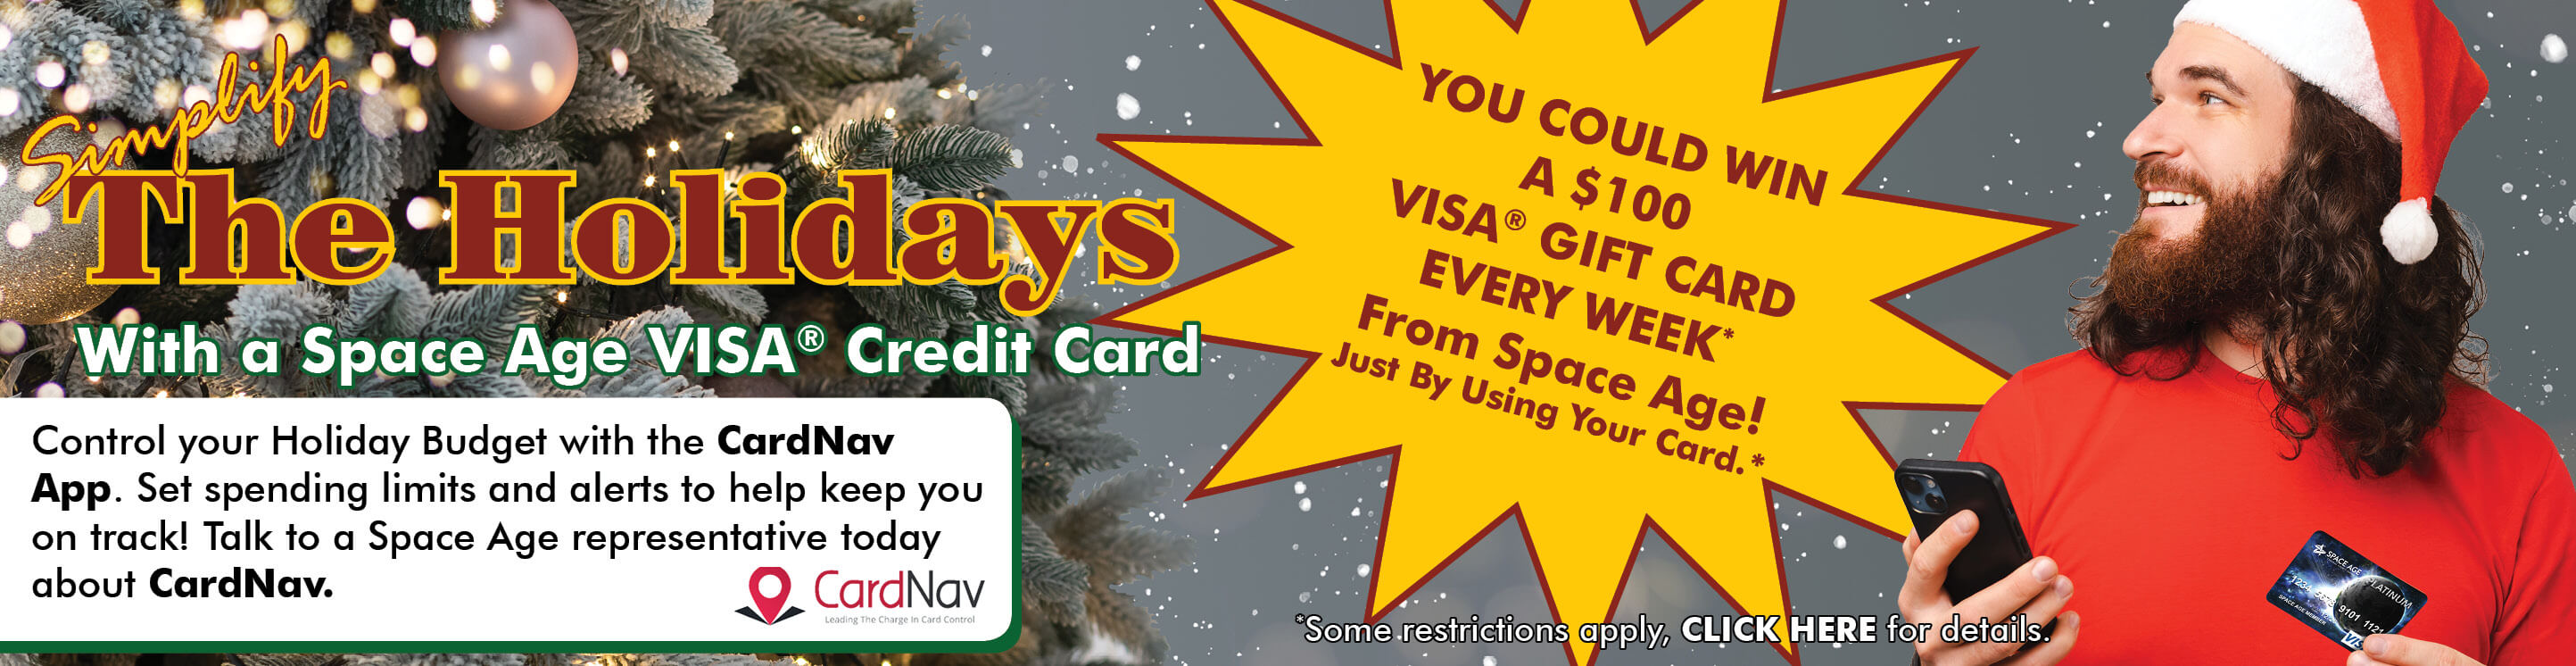 Use your Space Age VISA Credit Card and get the chance to win a $100 VISA Gift Card EVERY WEEK!